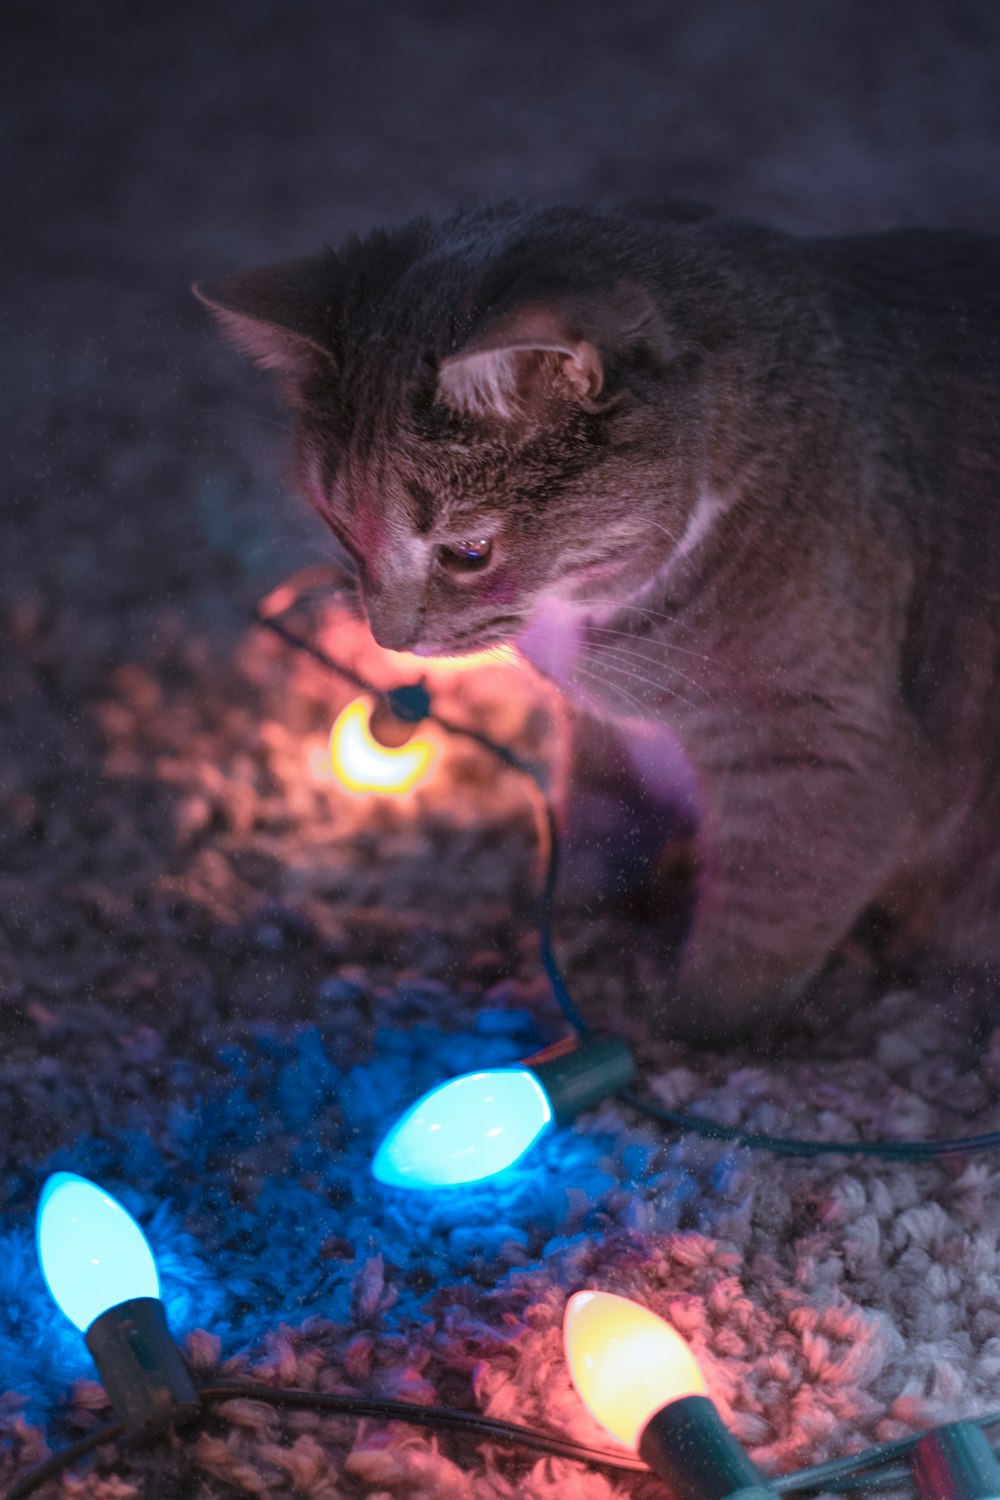 a cat sitting on the ground next to a string of lights